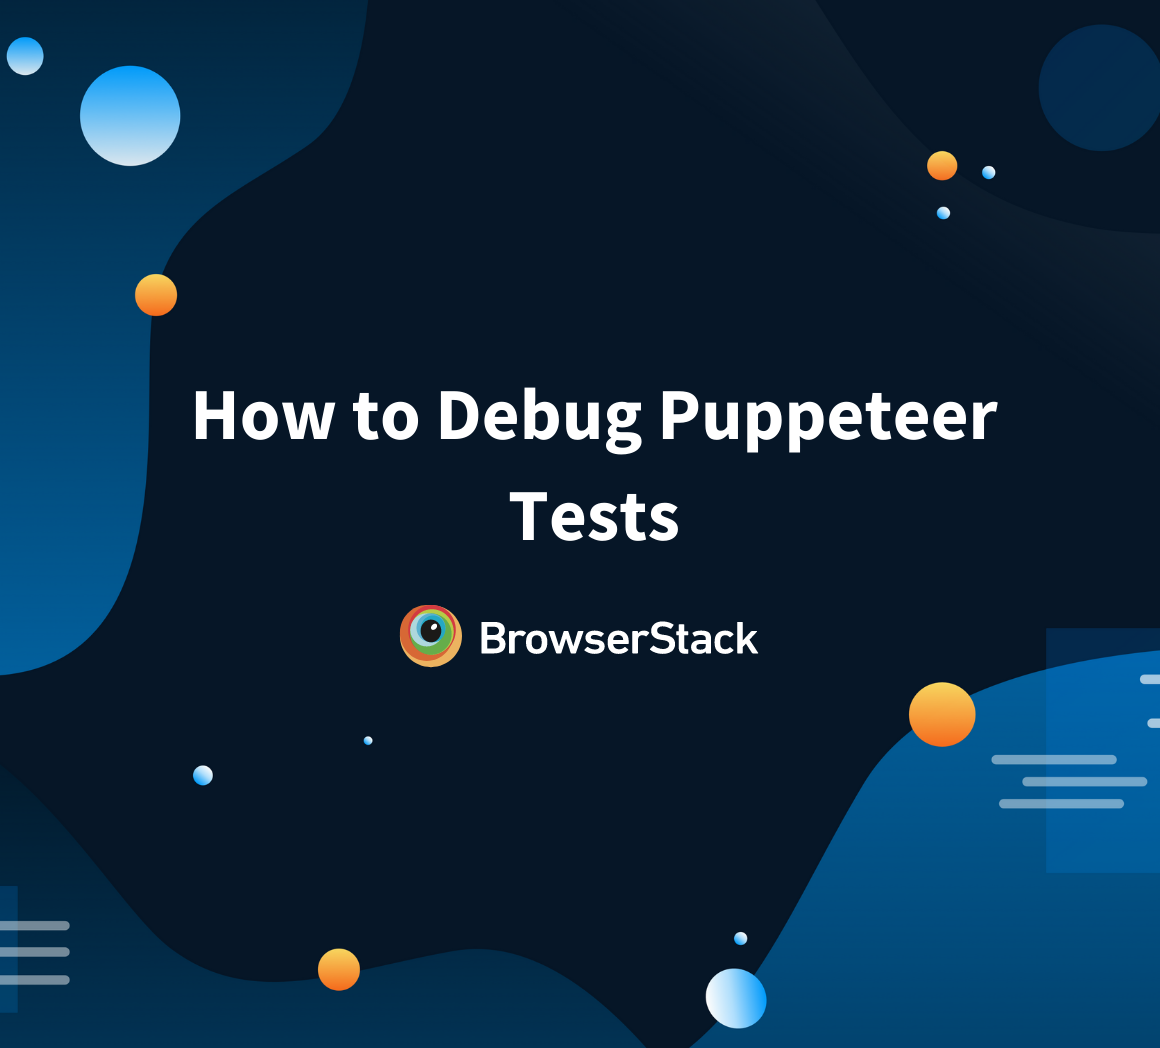 How to Debug Puppeteer Tests